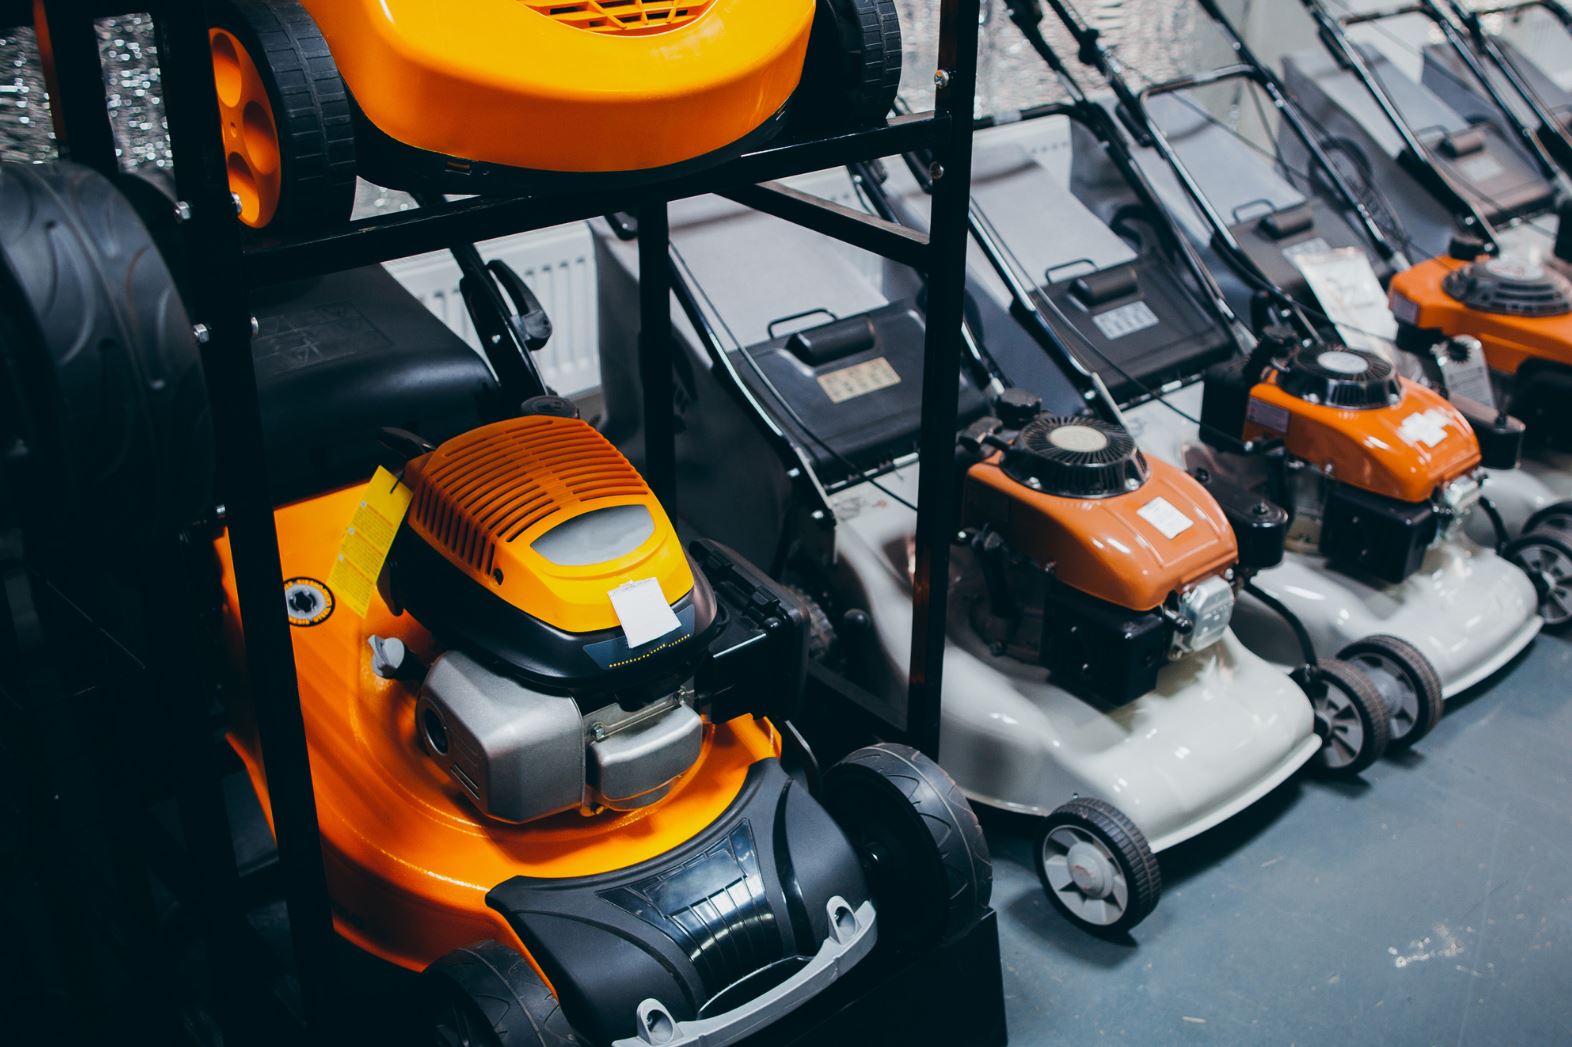 Lawnmowers secured in a hardware store by RTF Global security solutions.